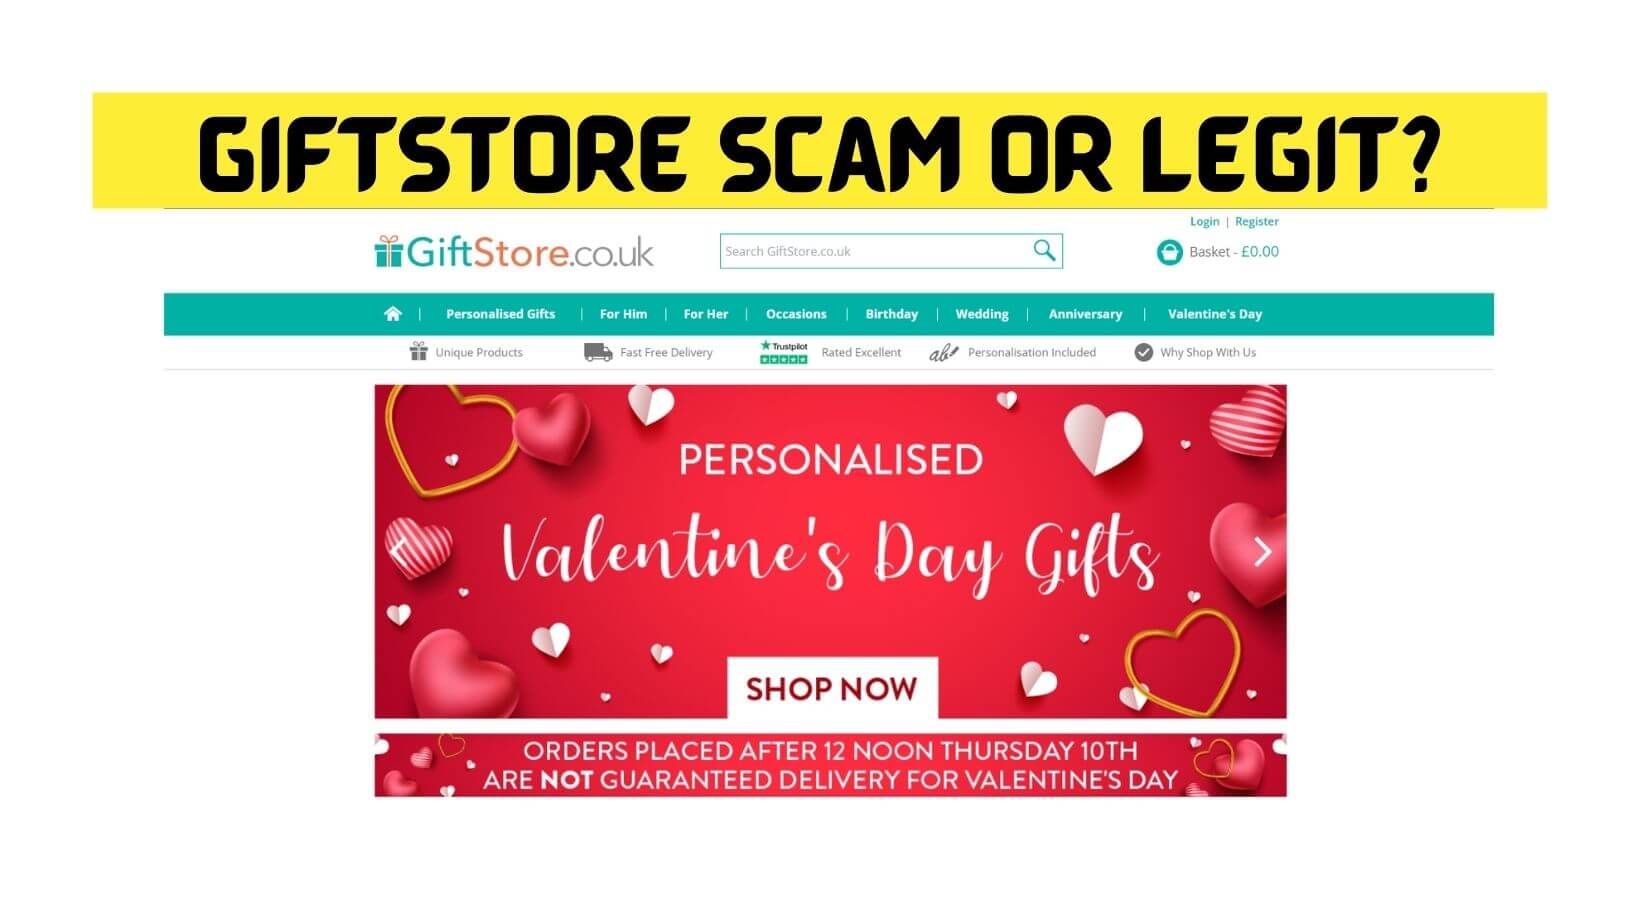 Giftstore Scam